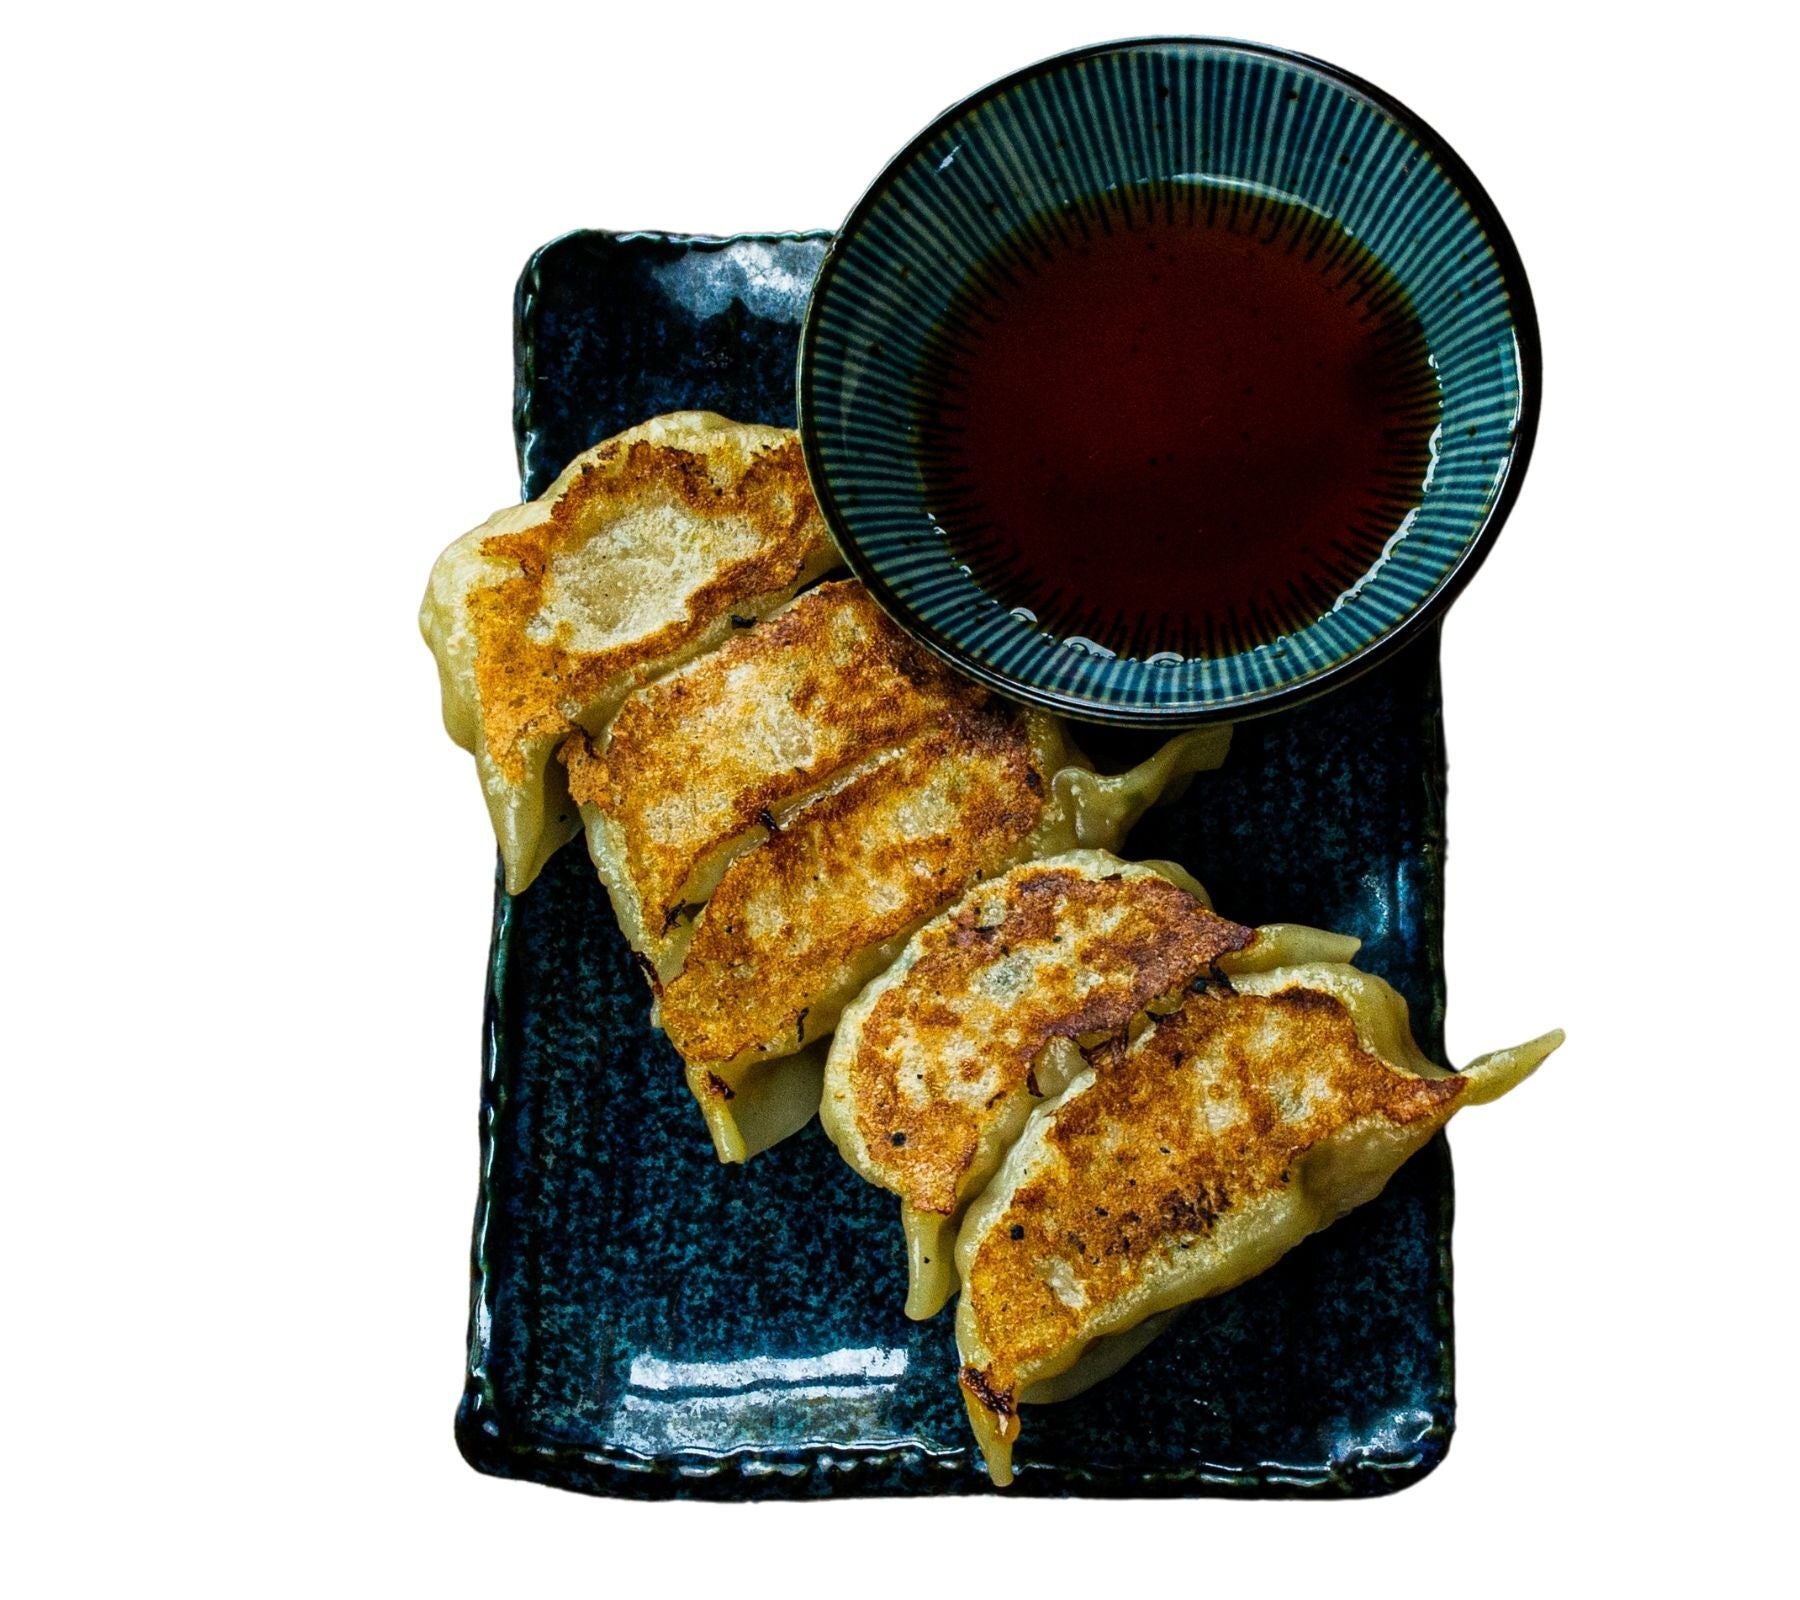 Plated fried gyoza with a side of sauce